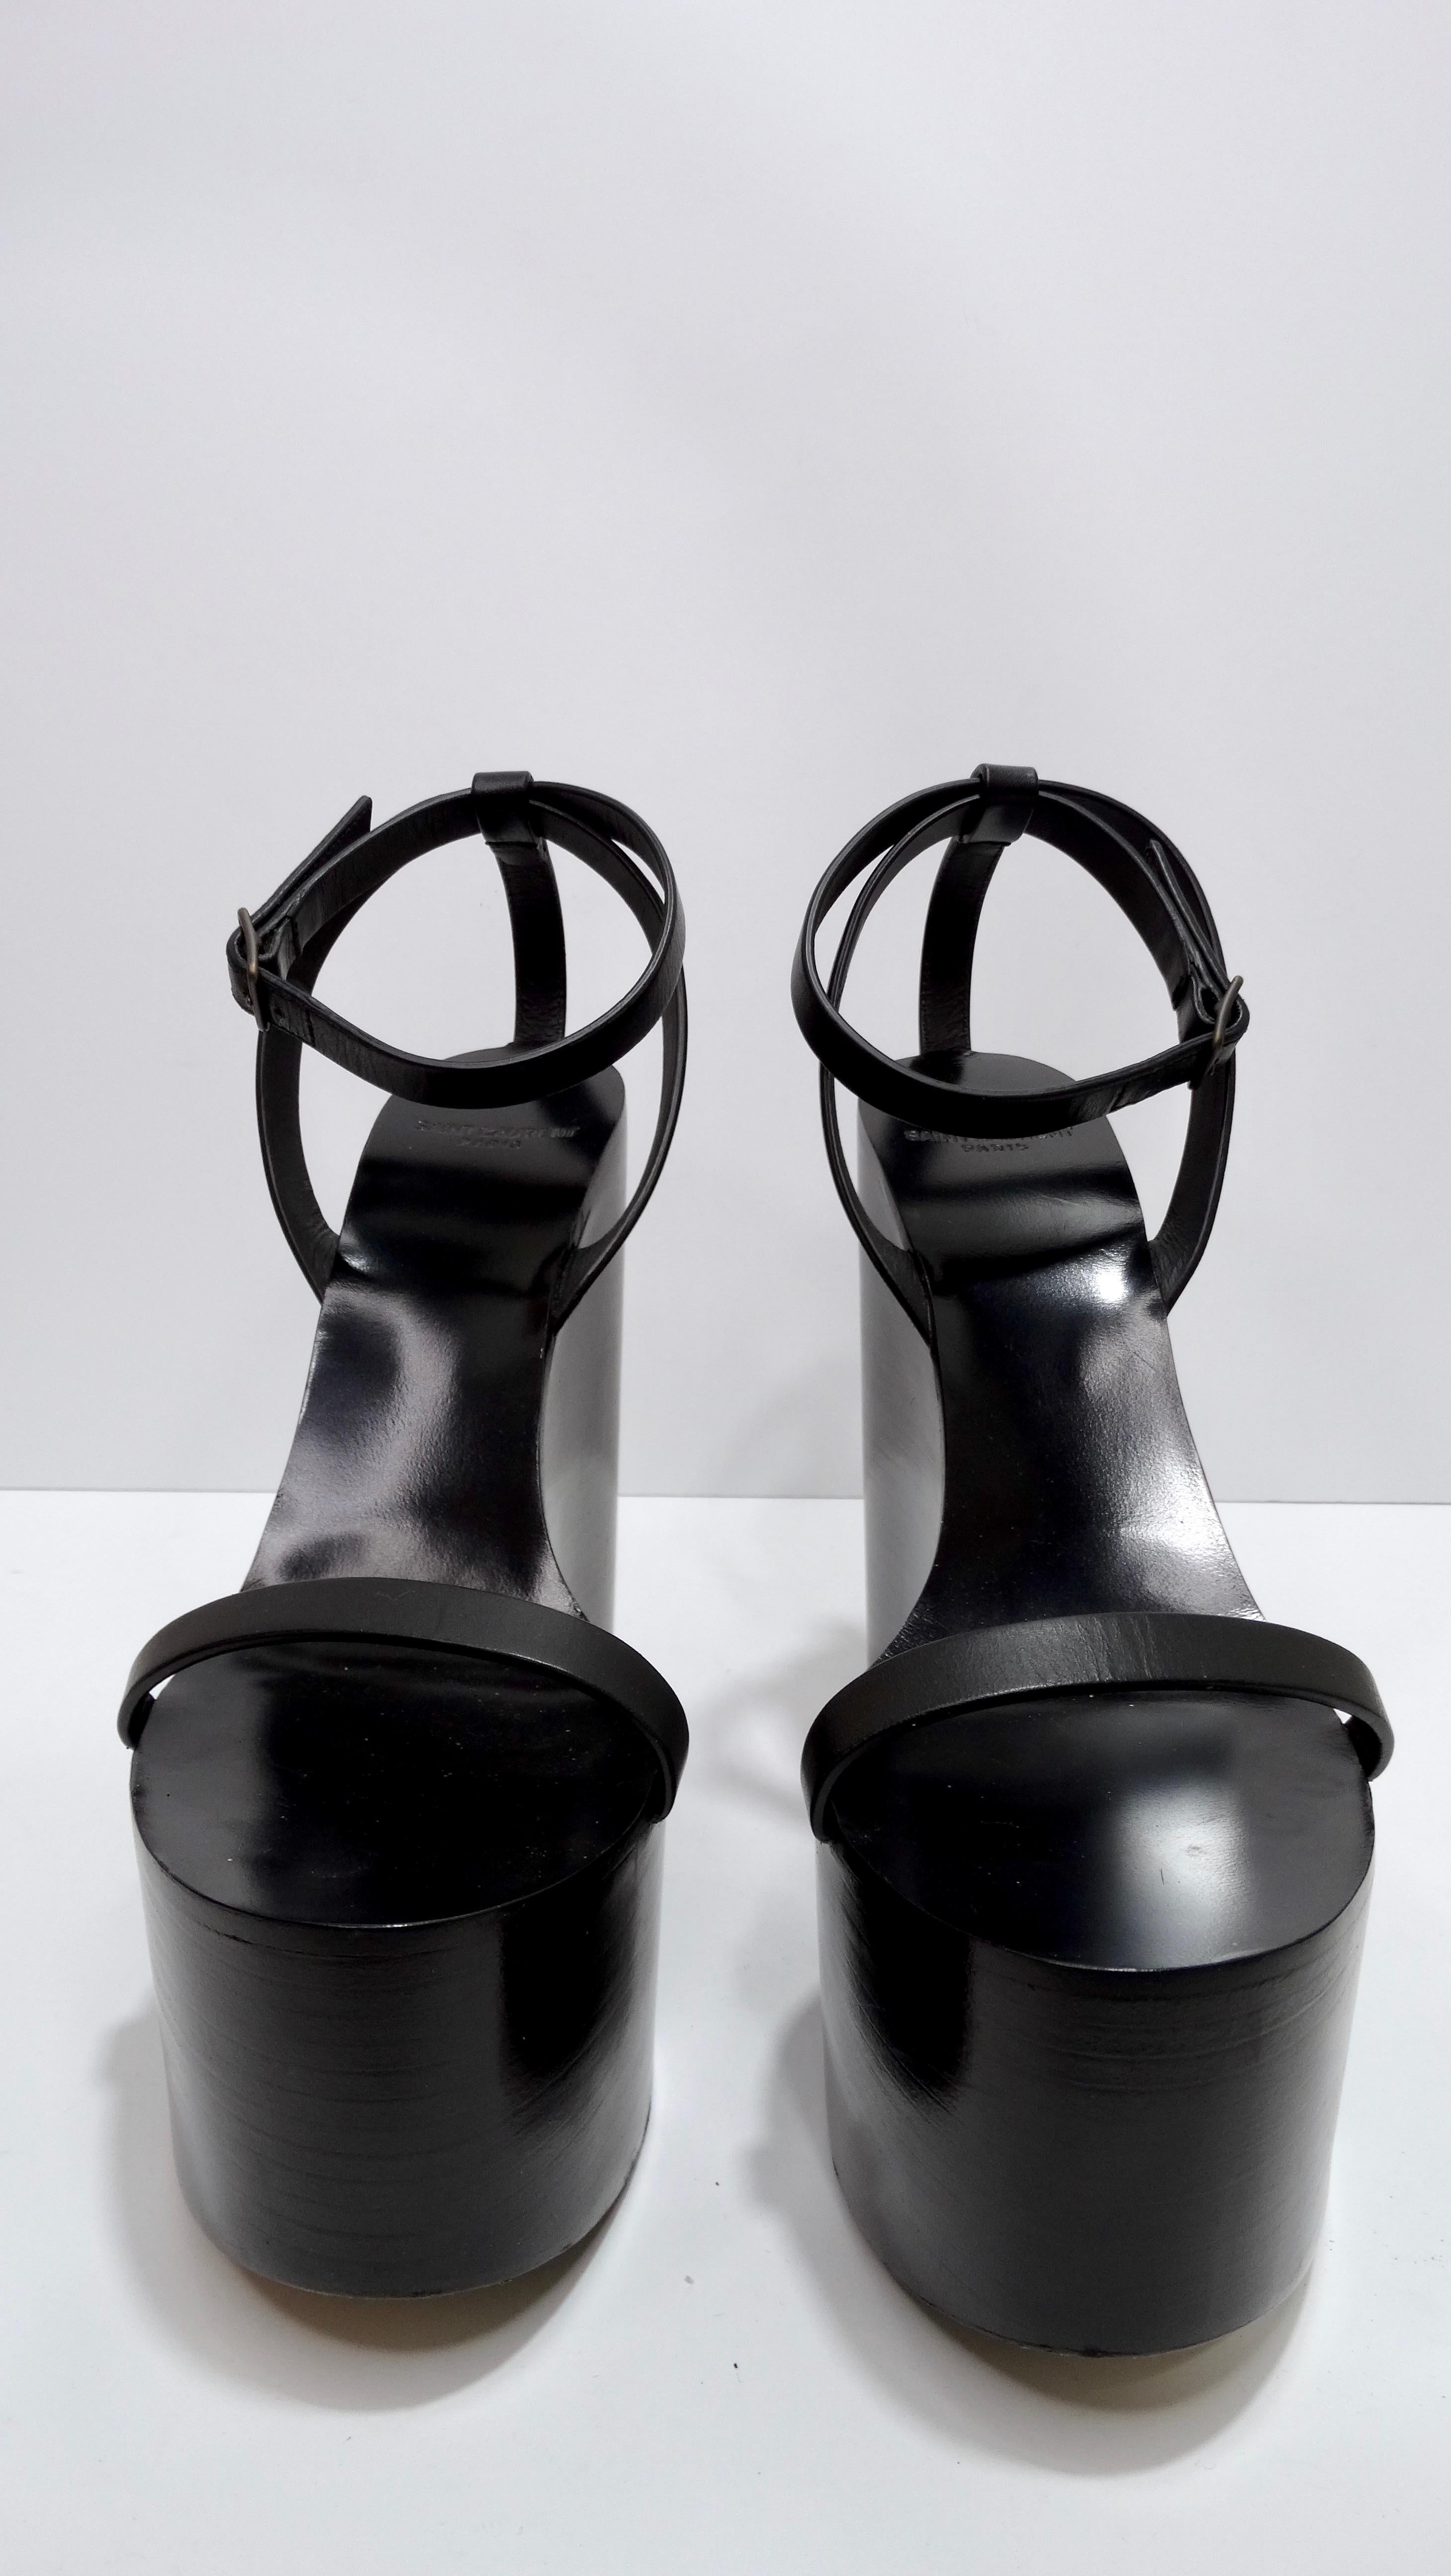 These are the most stunning Saint Laurent heels! The simple design is complete elegance. These heels are featured in a beautiful black wood that is in great condition with no notable flaws. This is a sandal silhouette with one toe strap and a